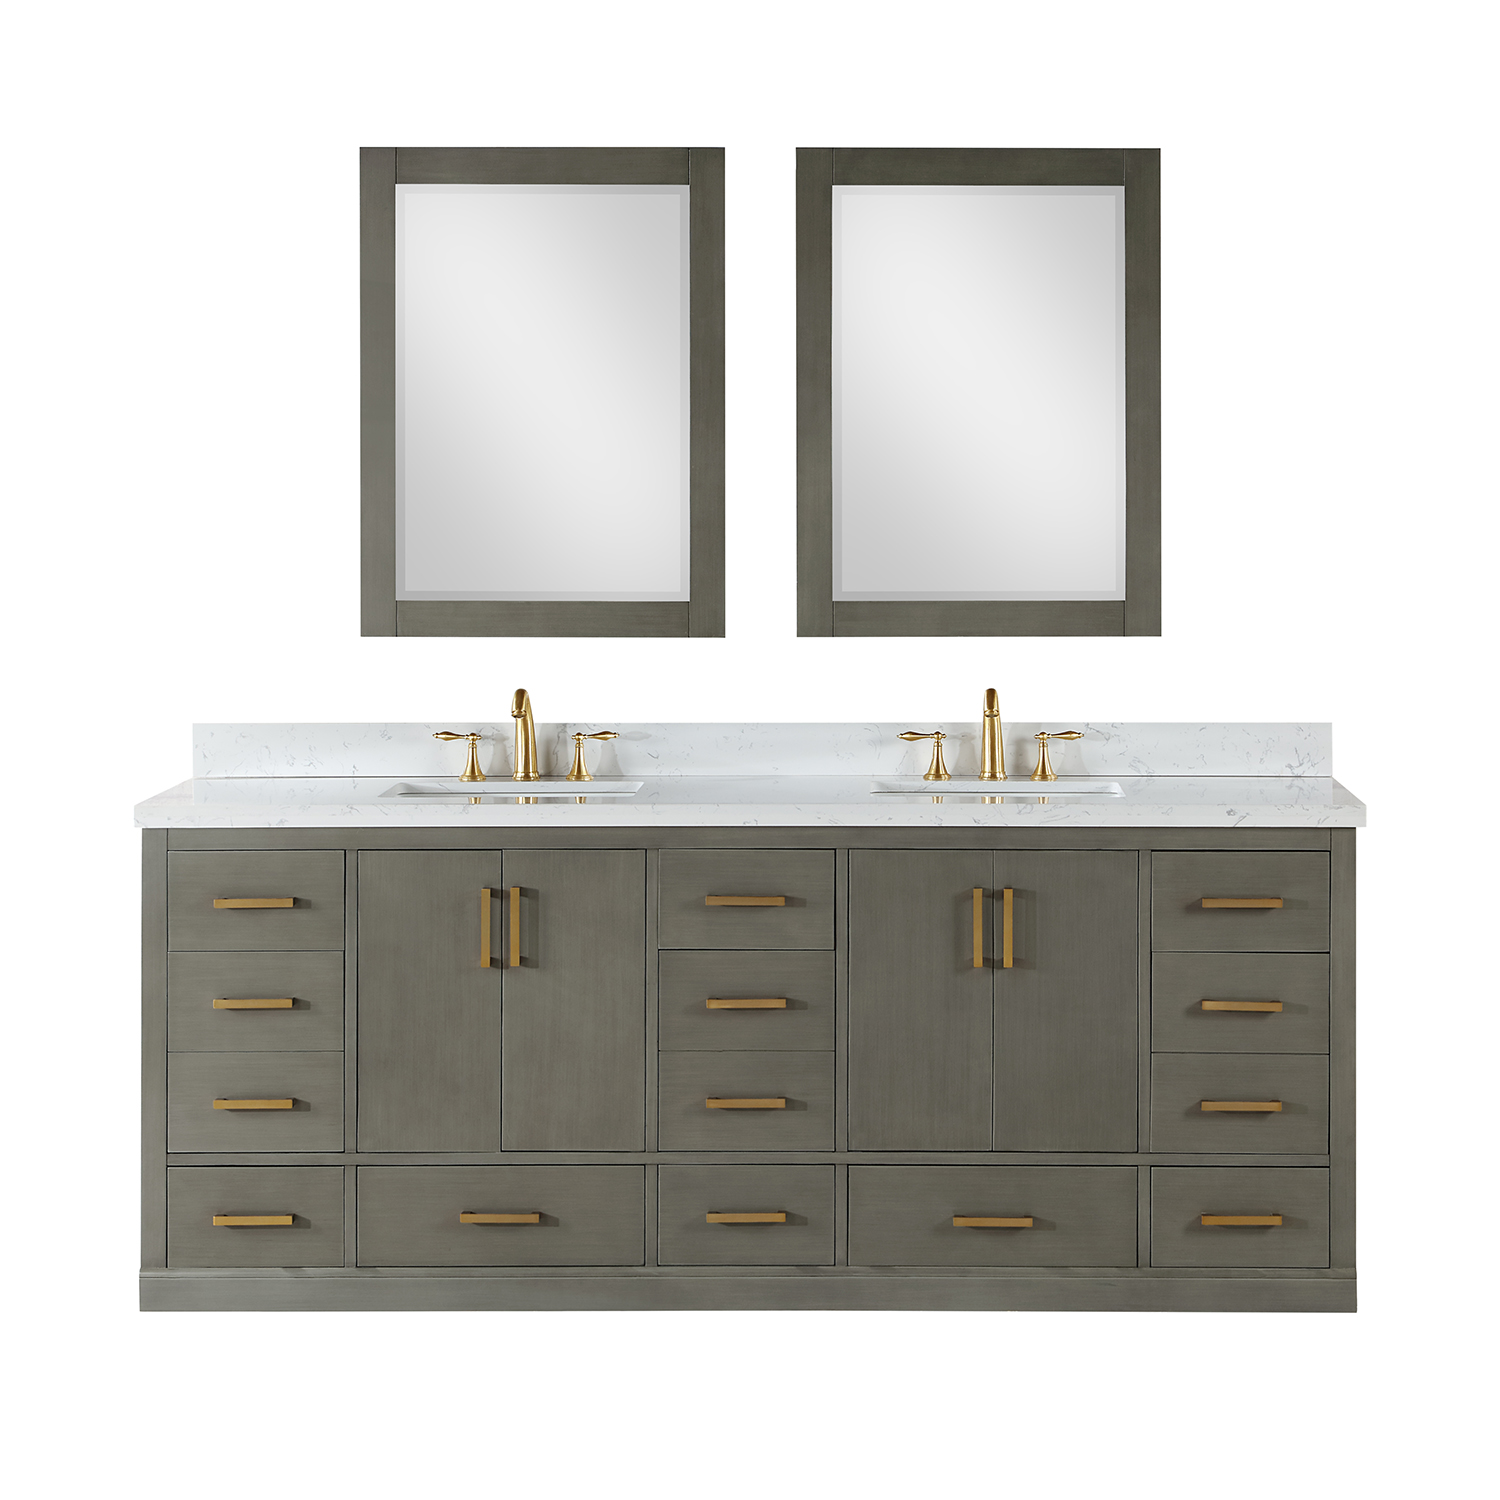 Issac Edwards Collection 84" Double Bathroom Vanity Set in Gray Pine with Carrara White Composite Stone Countertop without Mirror 